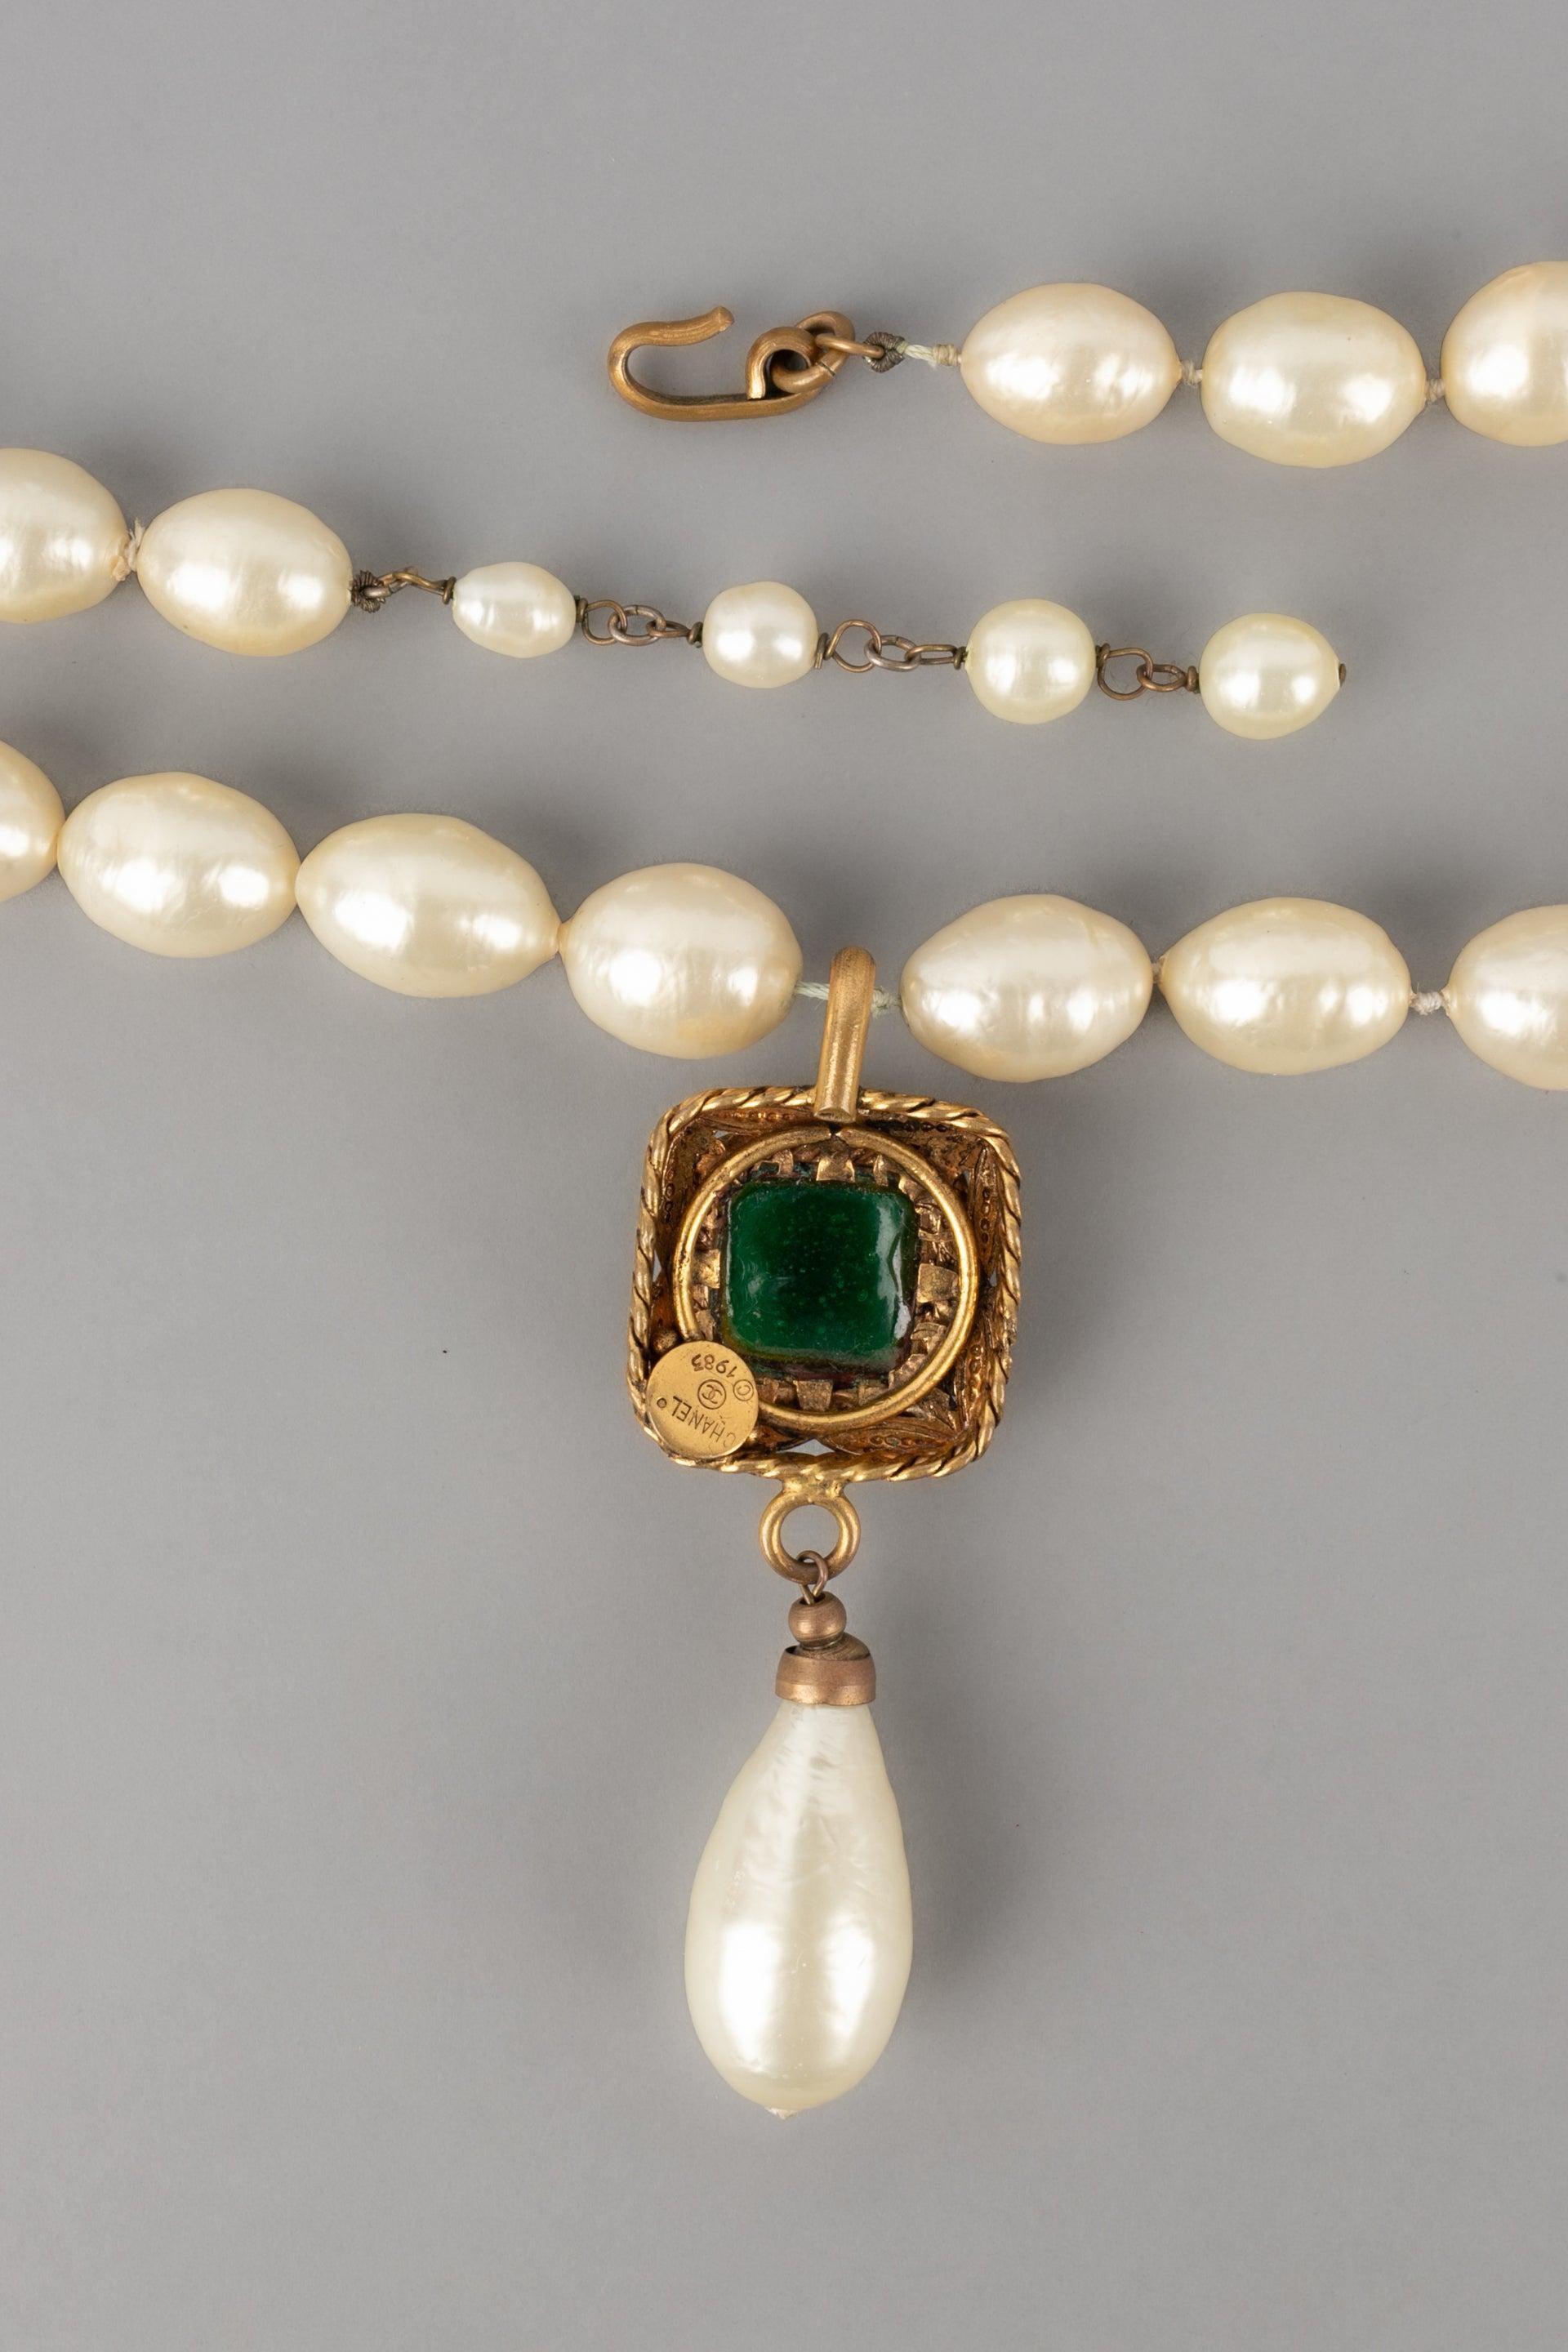 Women's Chanel Costume Pearl Necklace with a Golden Metal Pendant, 1983 For Sale